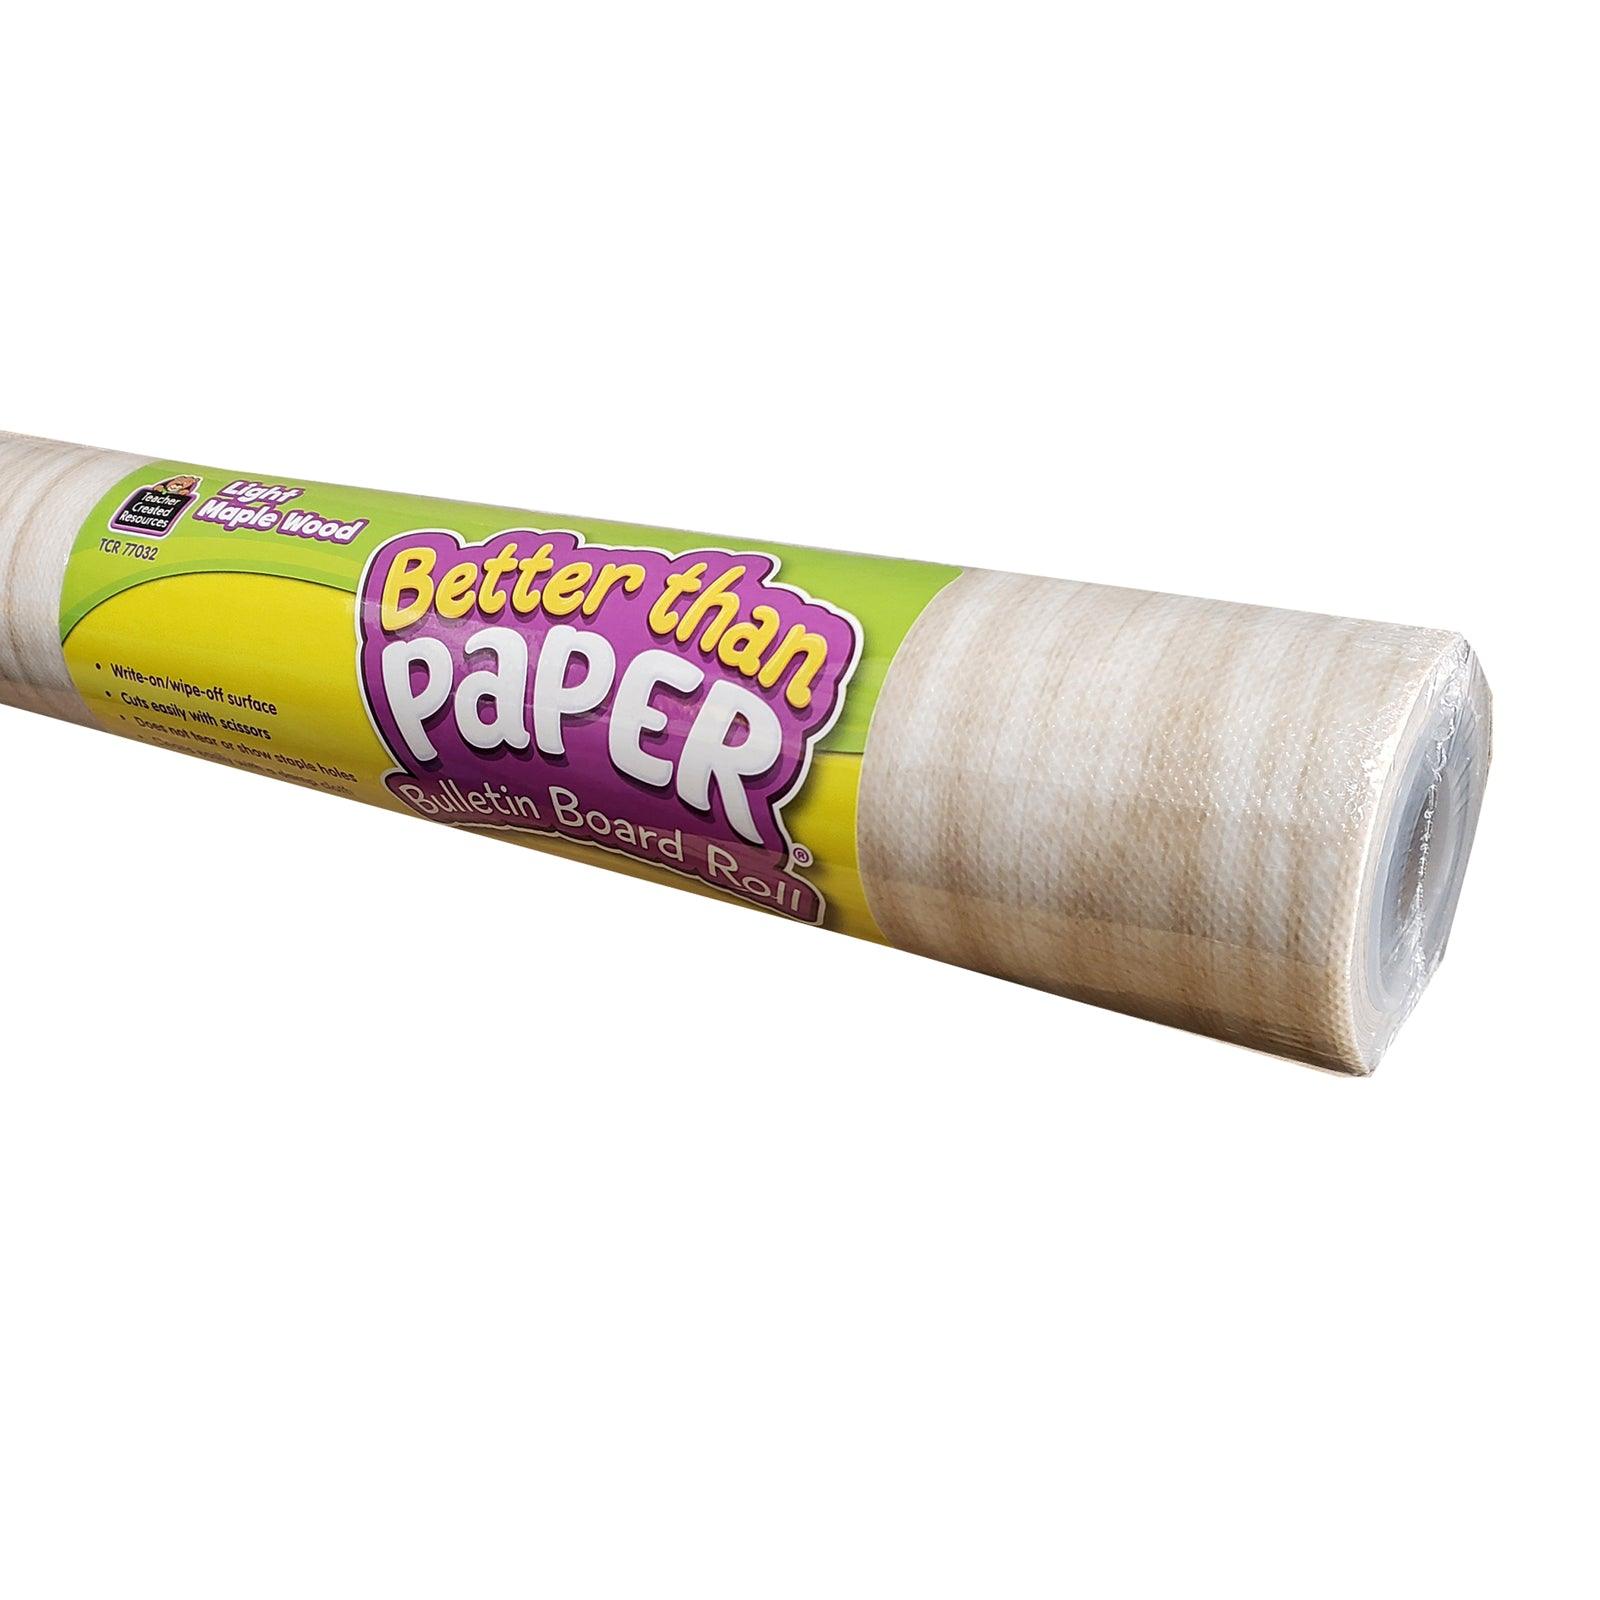 Better Than Paper® Bulletin Board Roll, 4' x 12', Light Maple Wood Design, Pack of 4 - Loomini